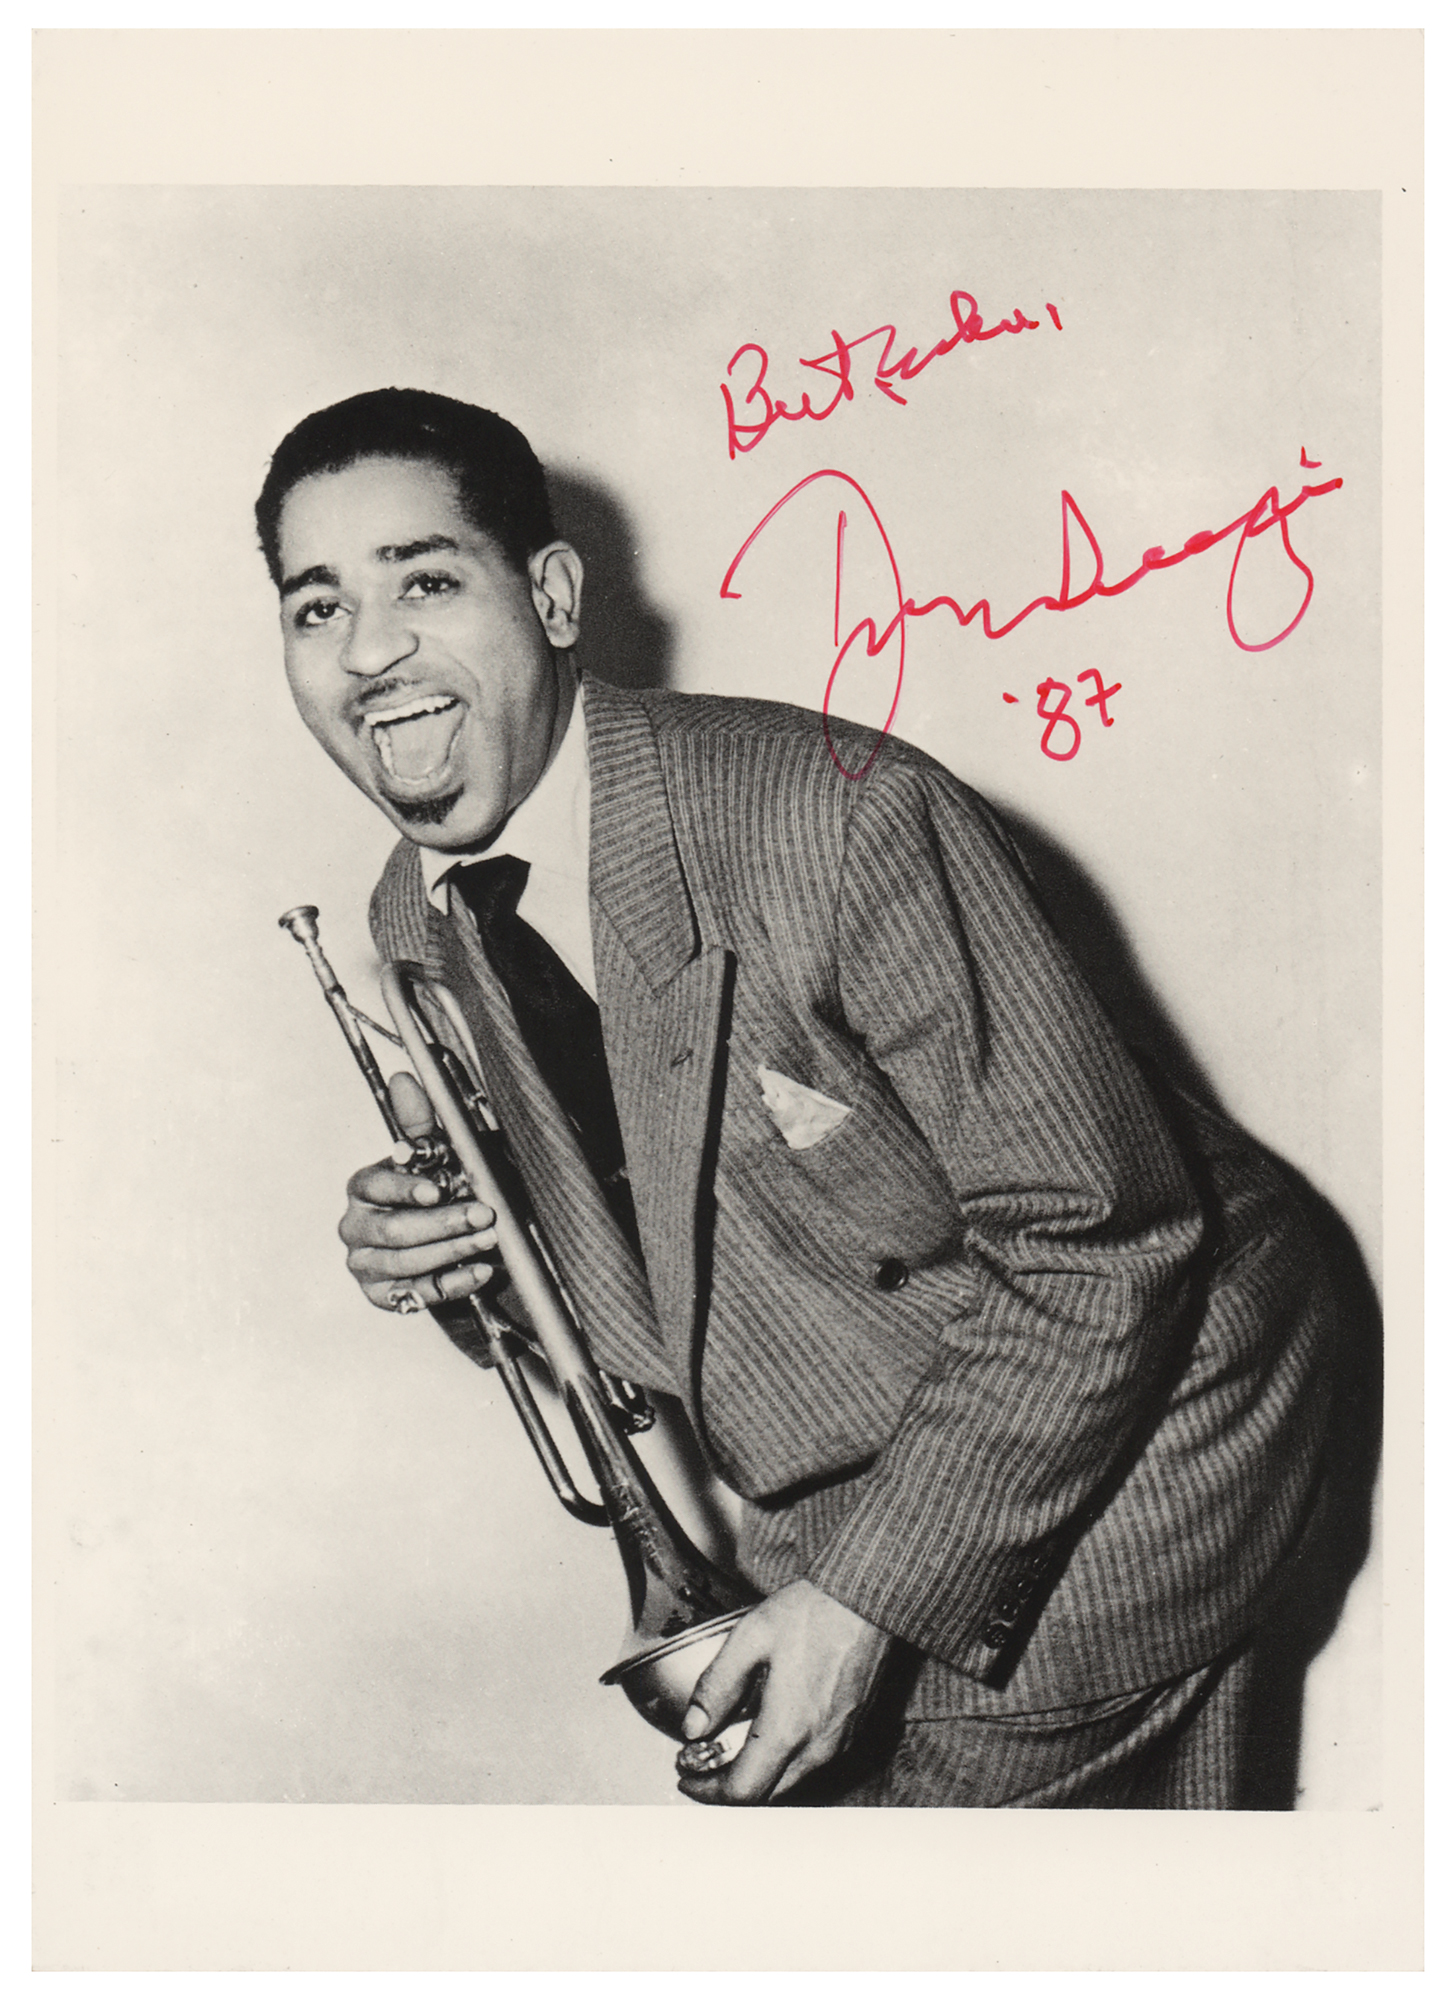 Lot #723 Dizzy Gillespie Signed Photograph